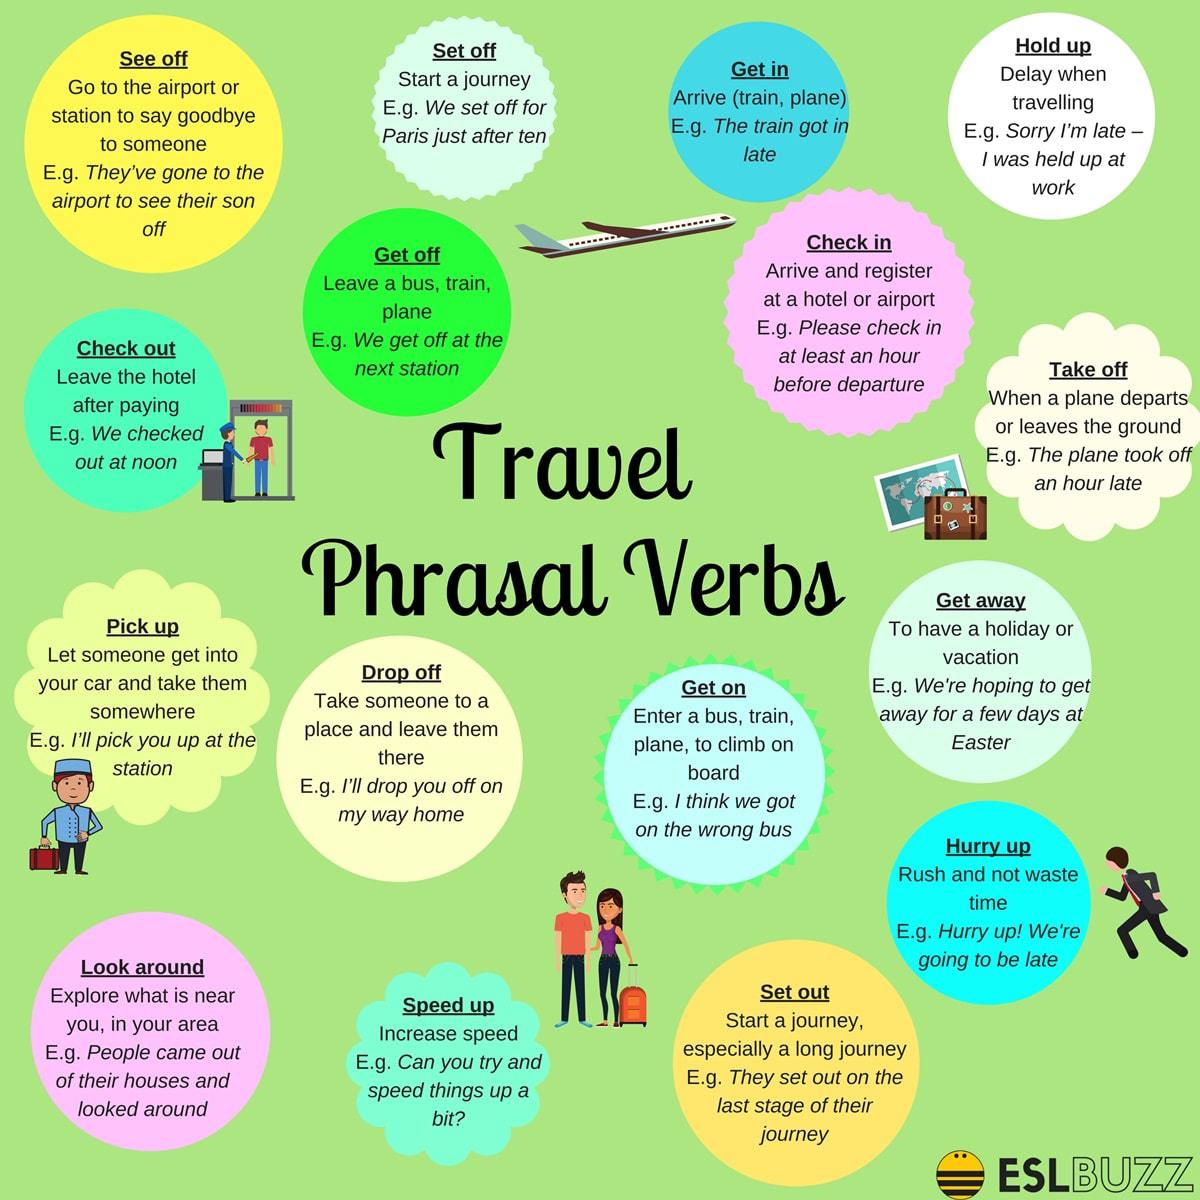 click-on-phrasal-verbs-travelling